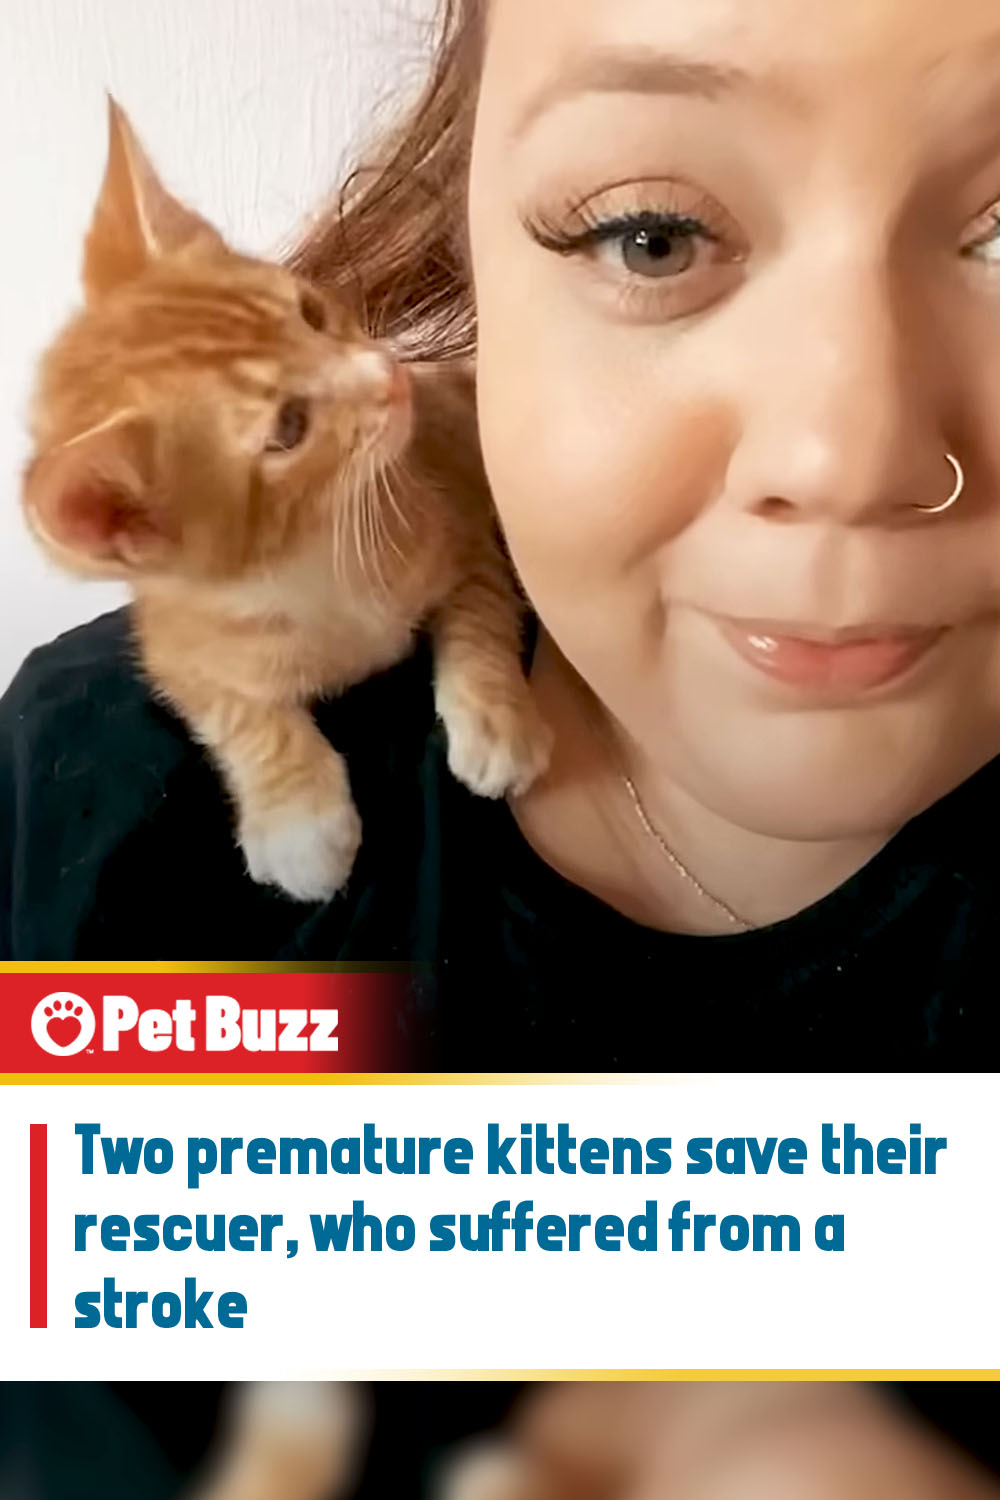 Two premature kittens save their rescuer, who suffered from a stroke